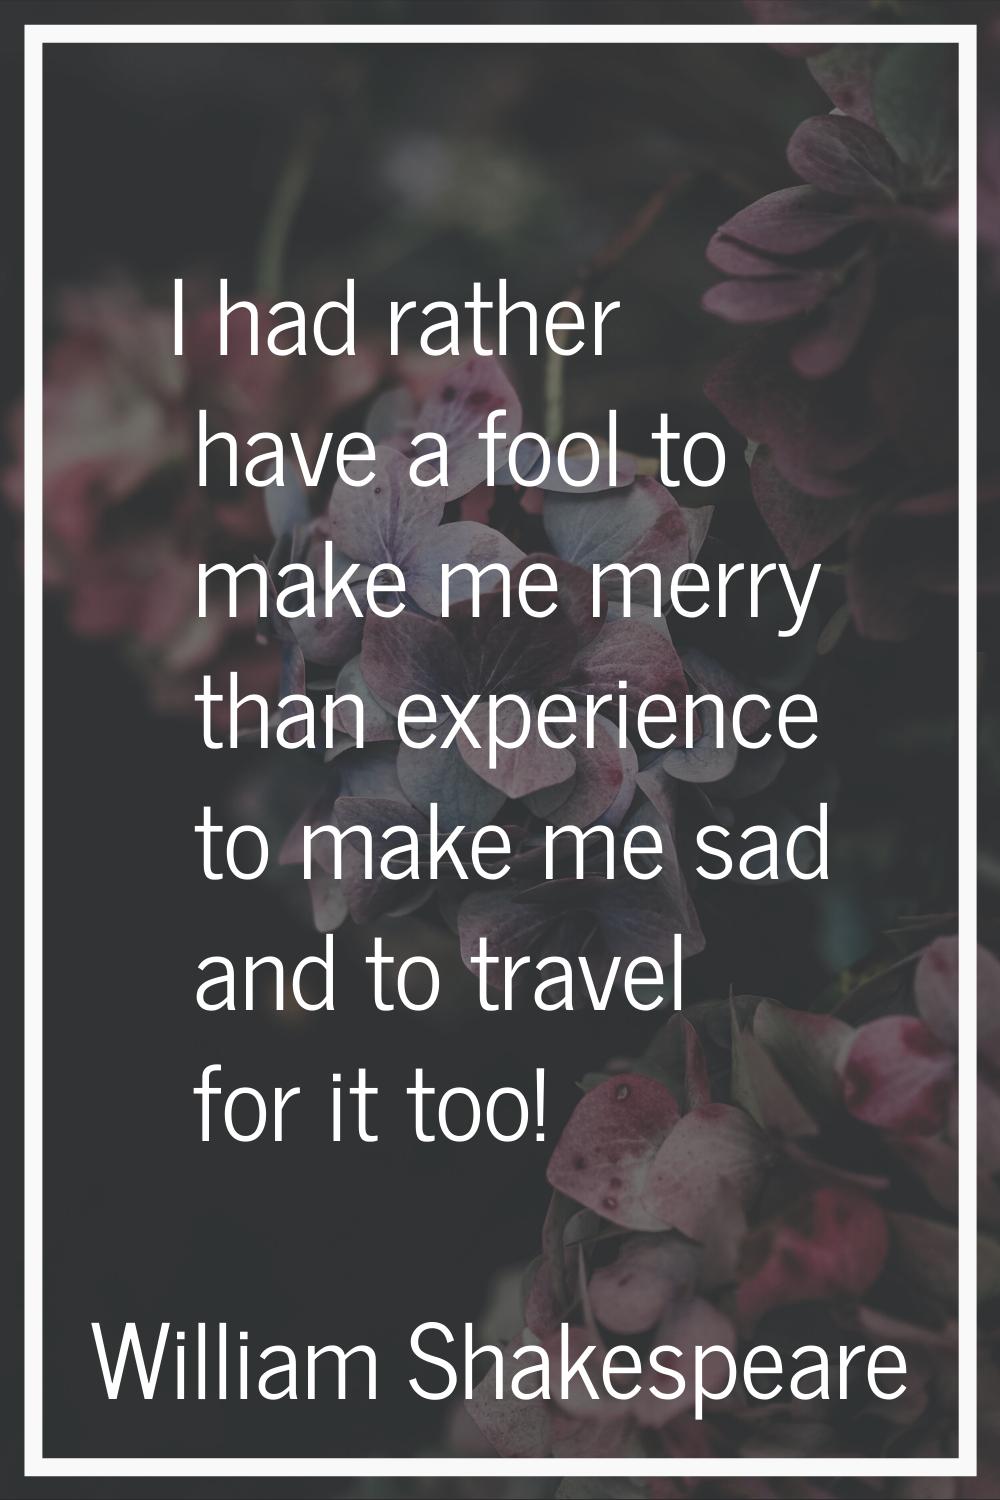 I had rather have a fool to make me merry than experience to make me sad and to travel for it too!